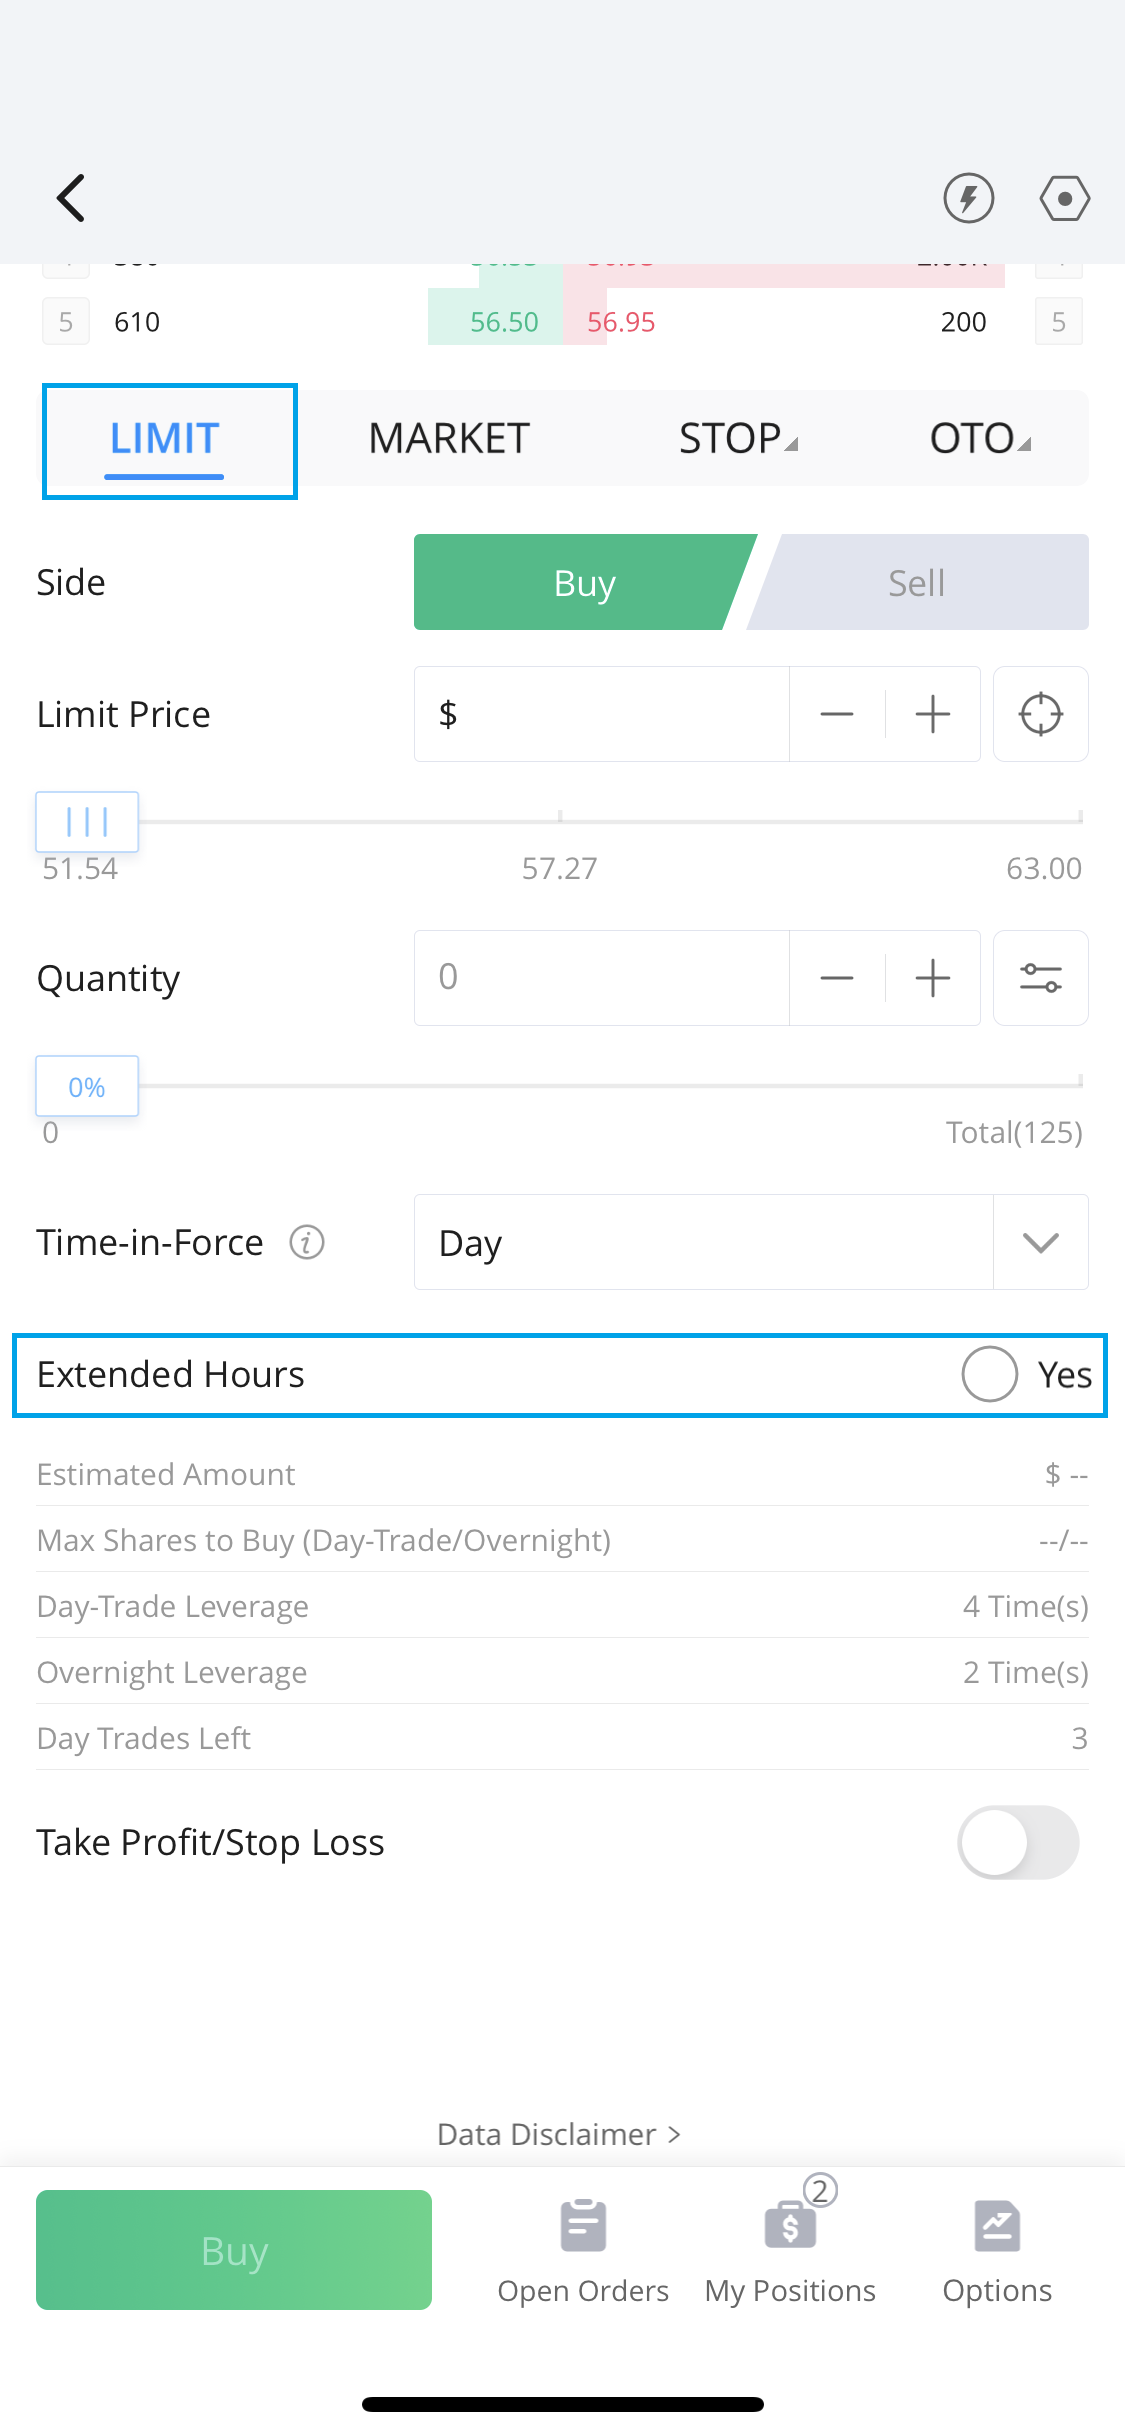 Can I trade during extended hours on Webull?